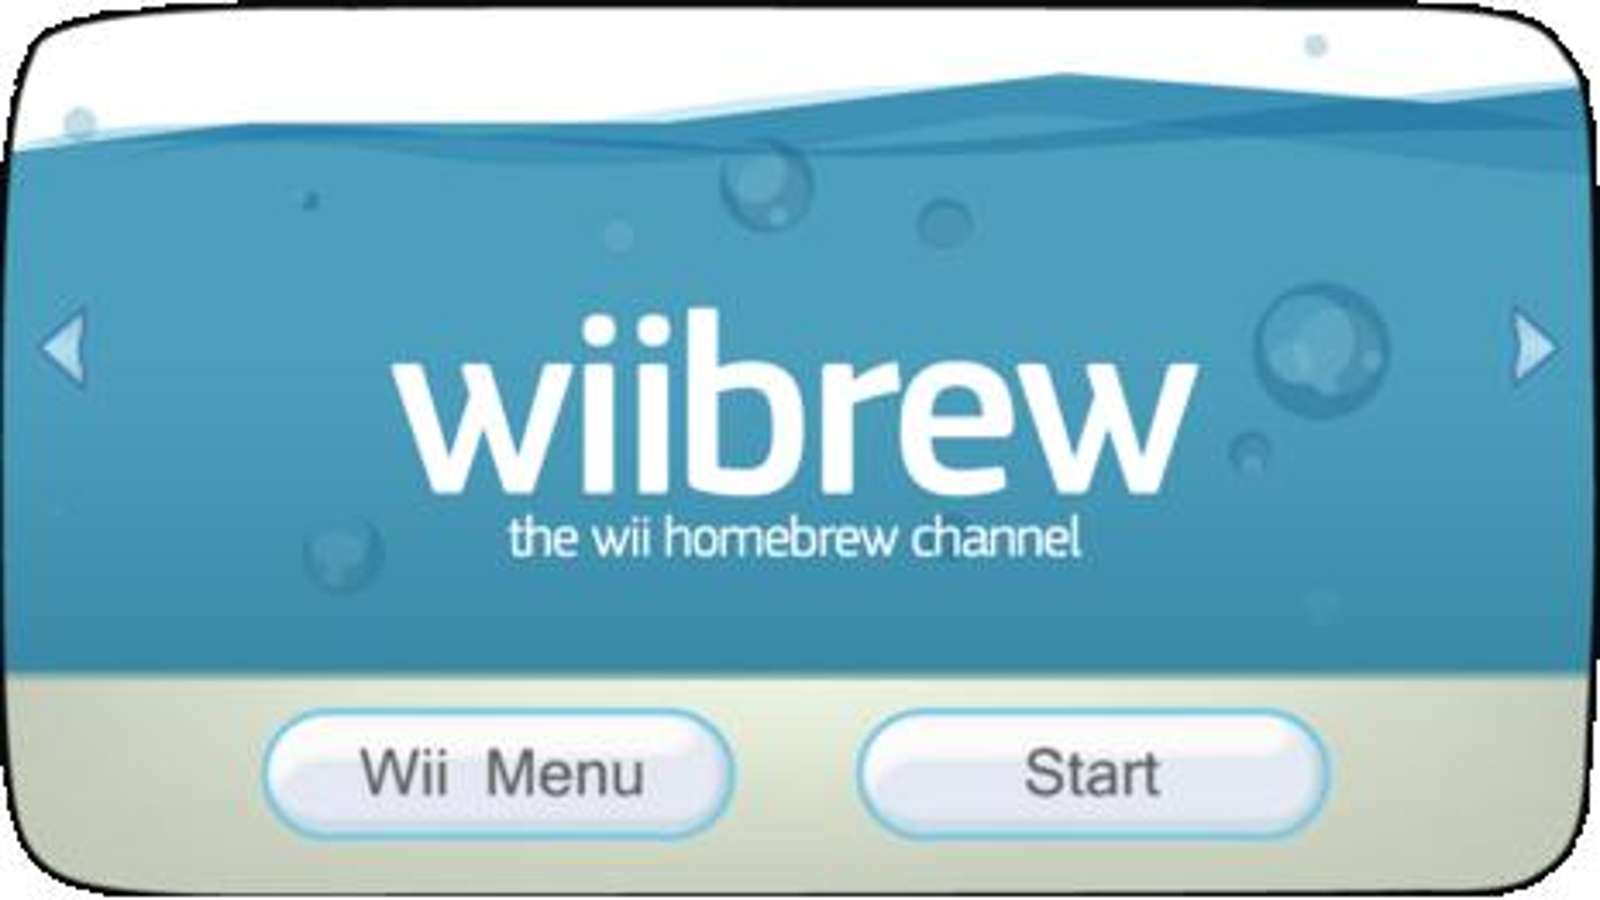 installing homebrew channel on wii